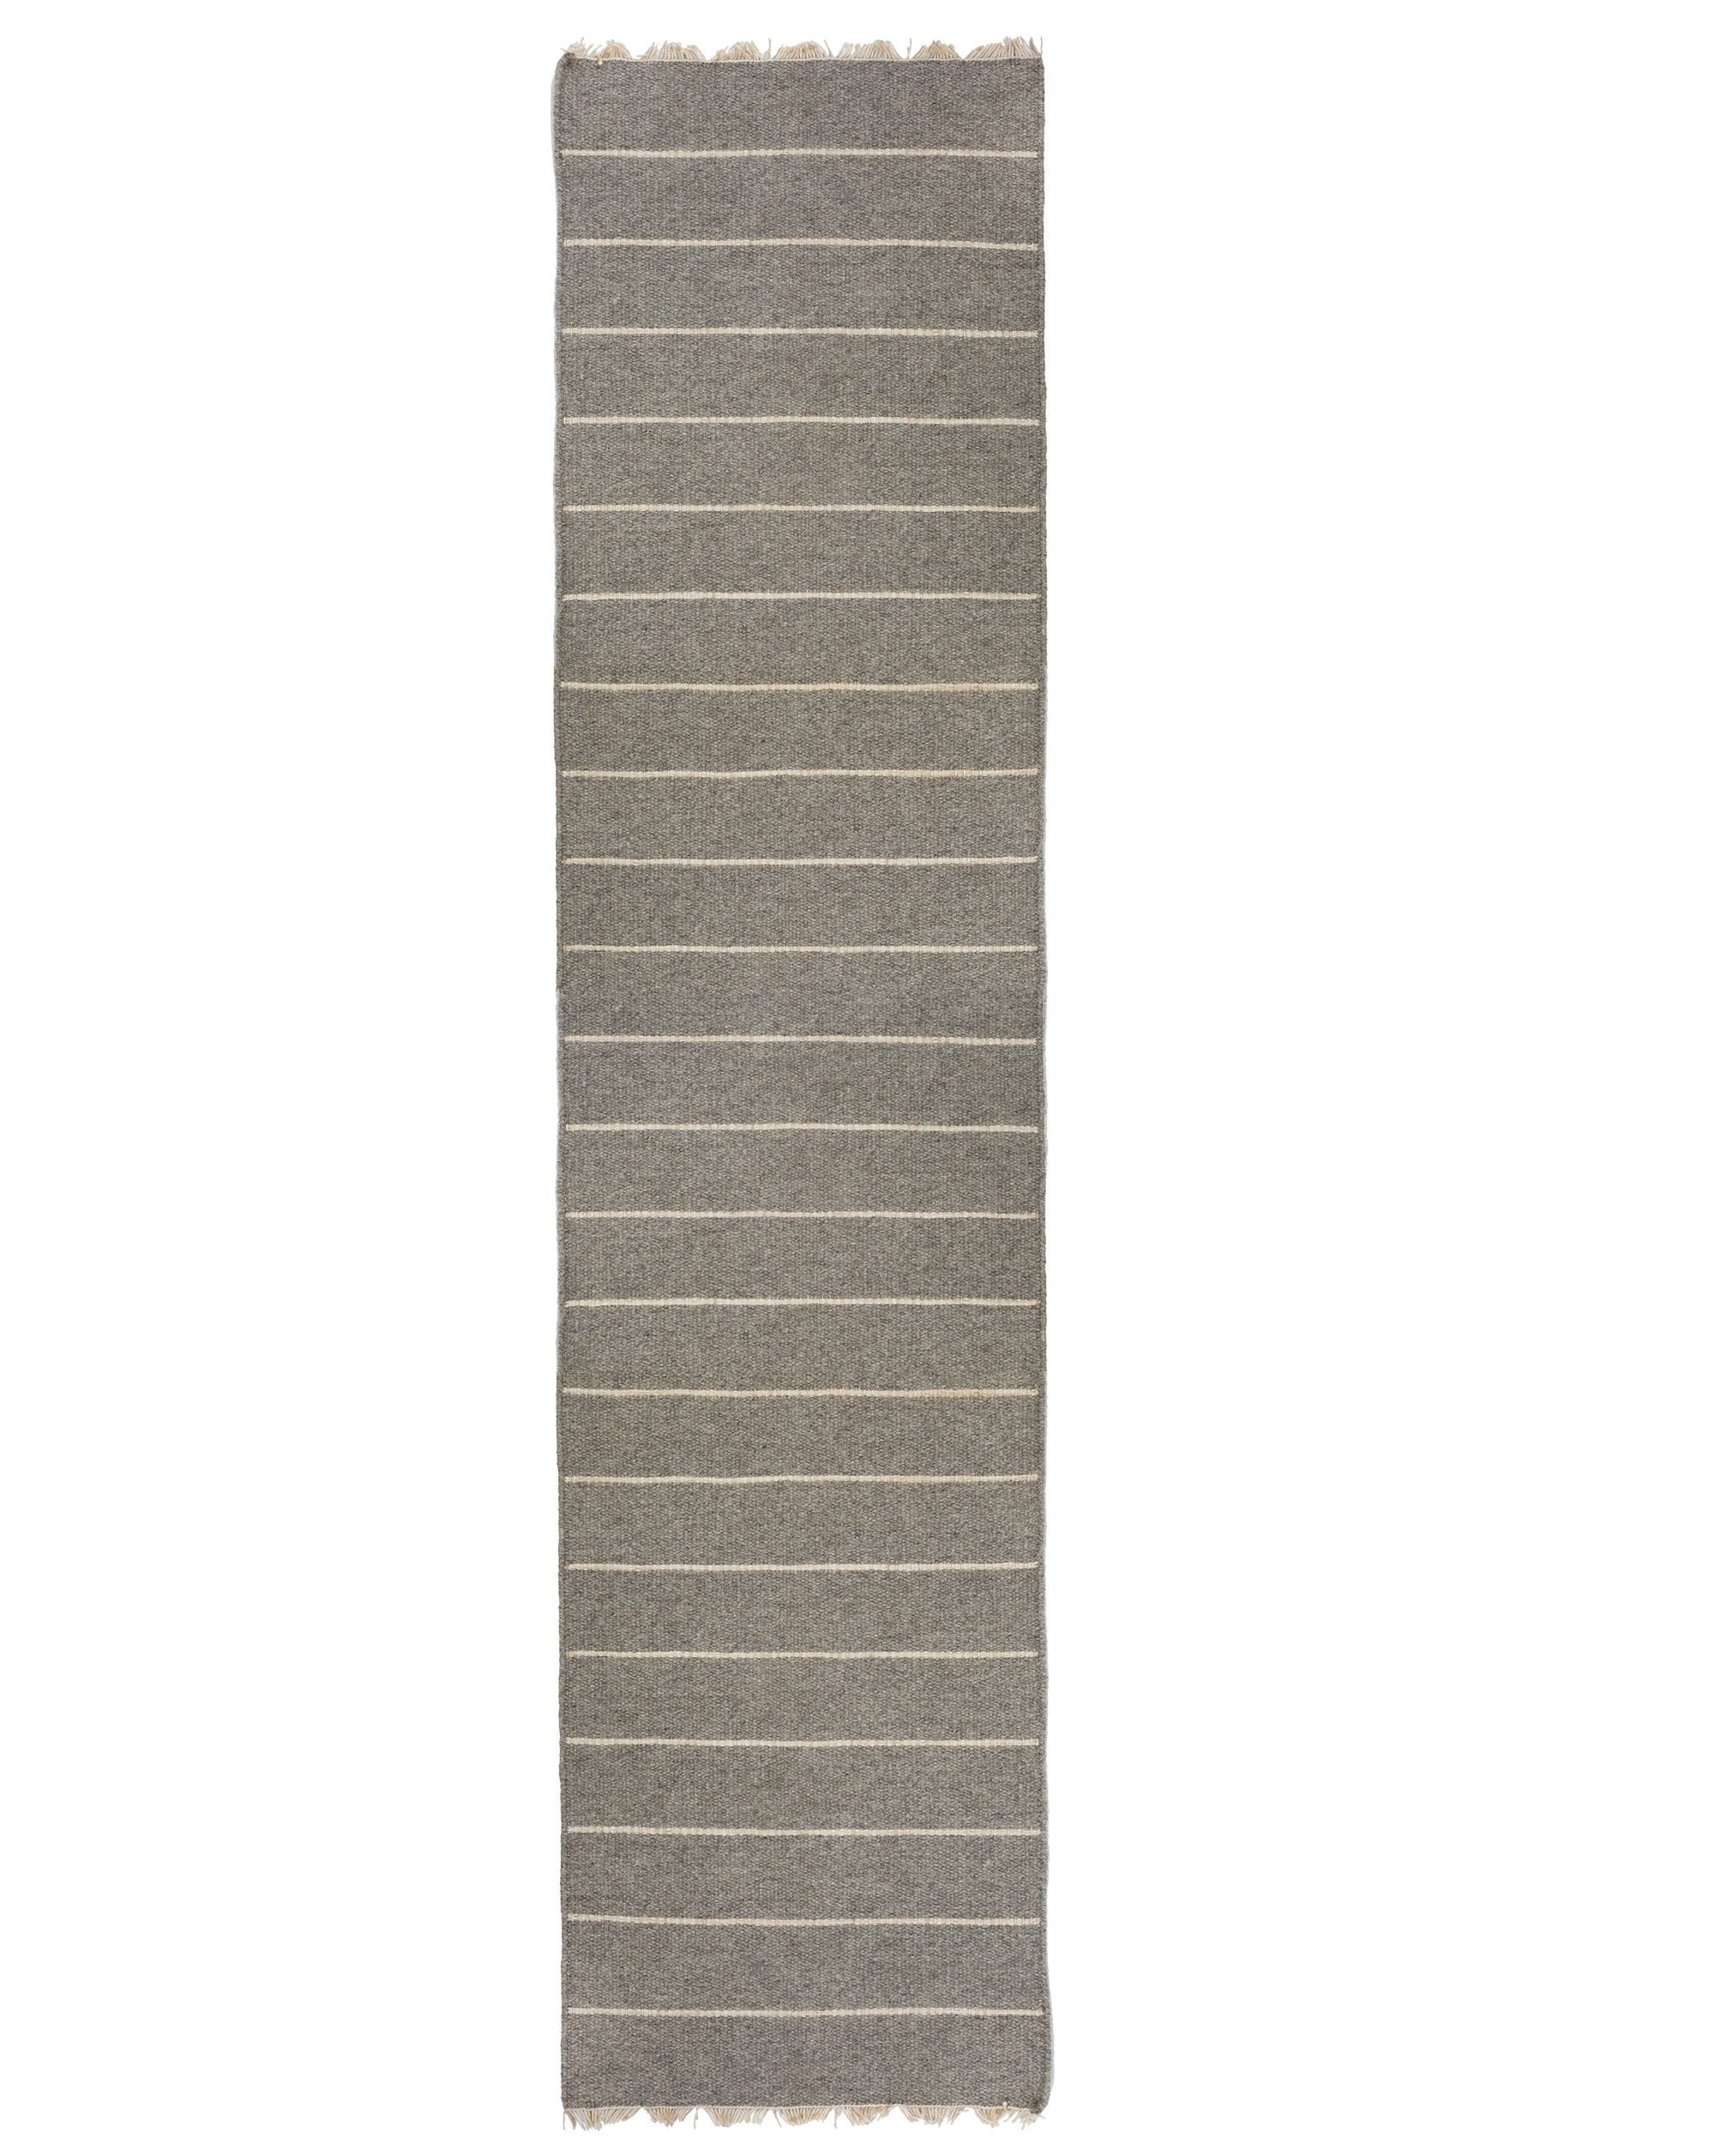 WARBY HANDWOVEN RUG - LIGHT GREY-Pom Pom at Home